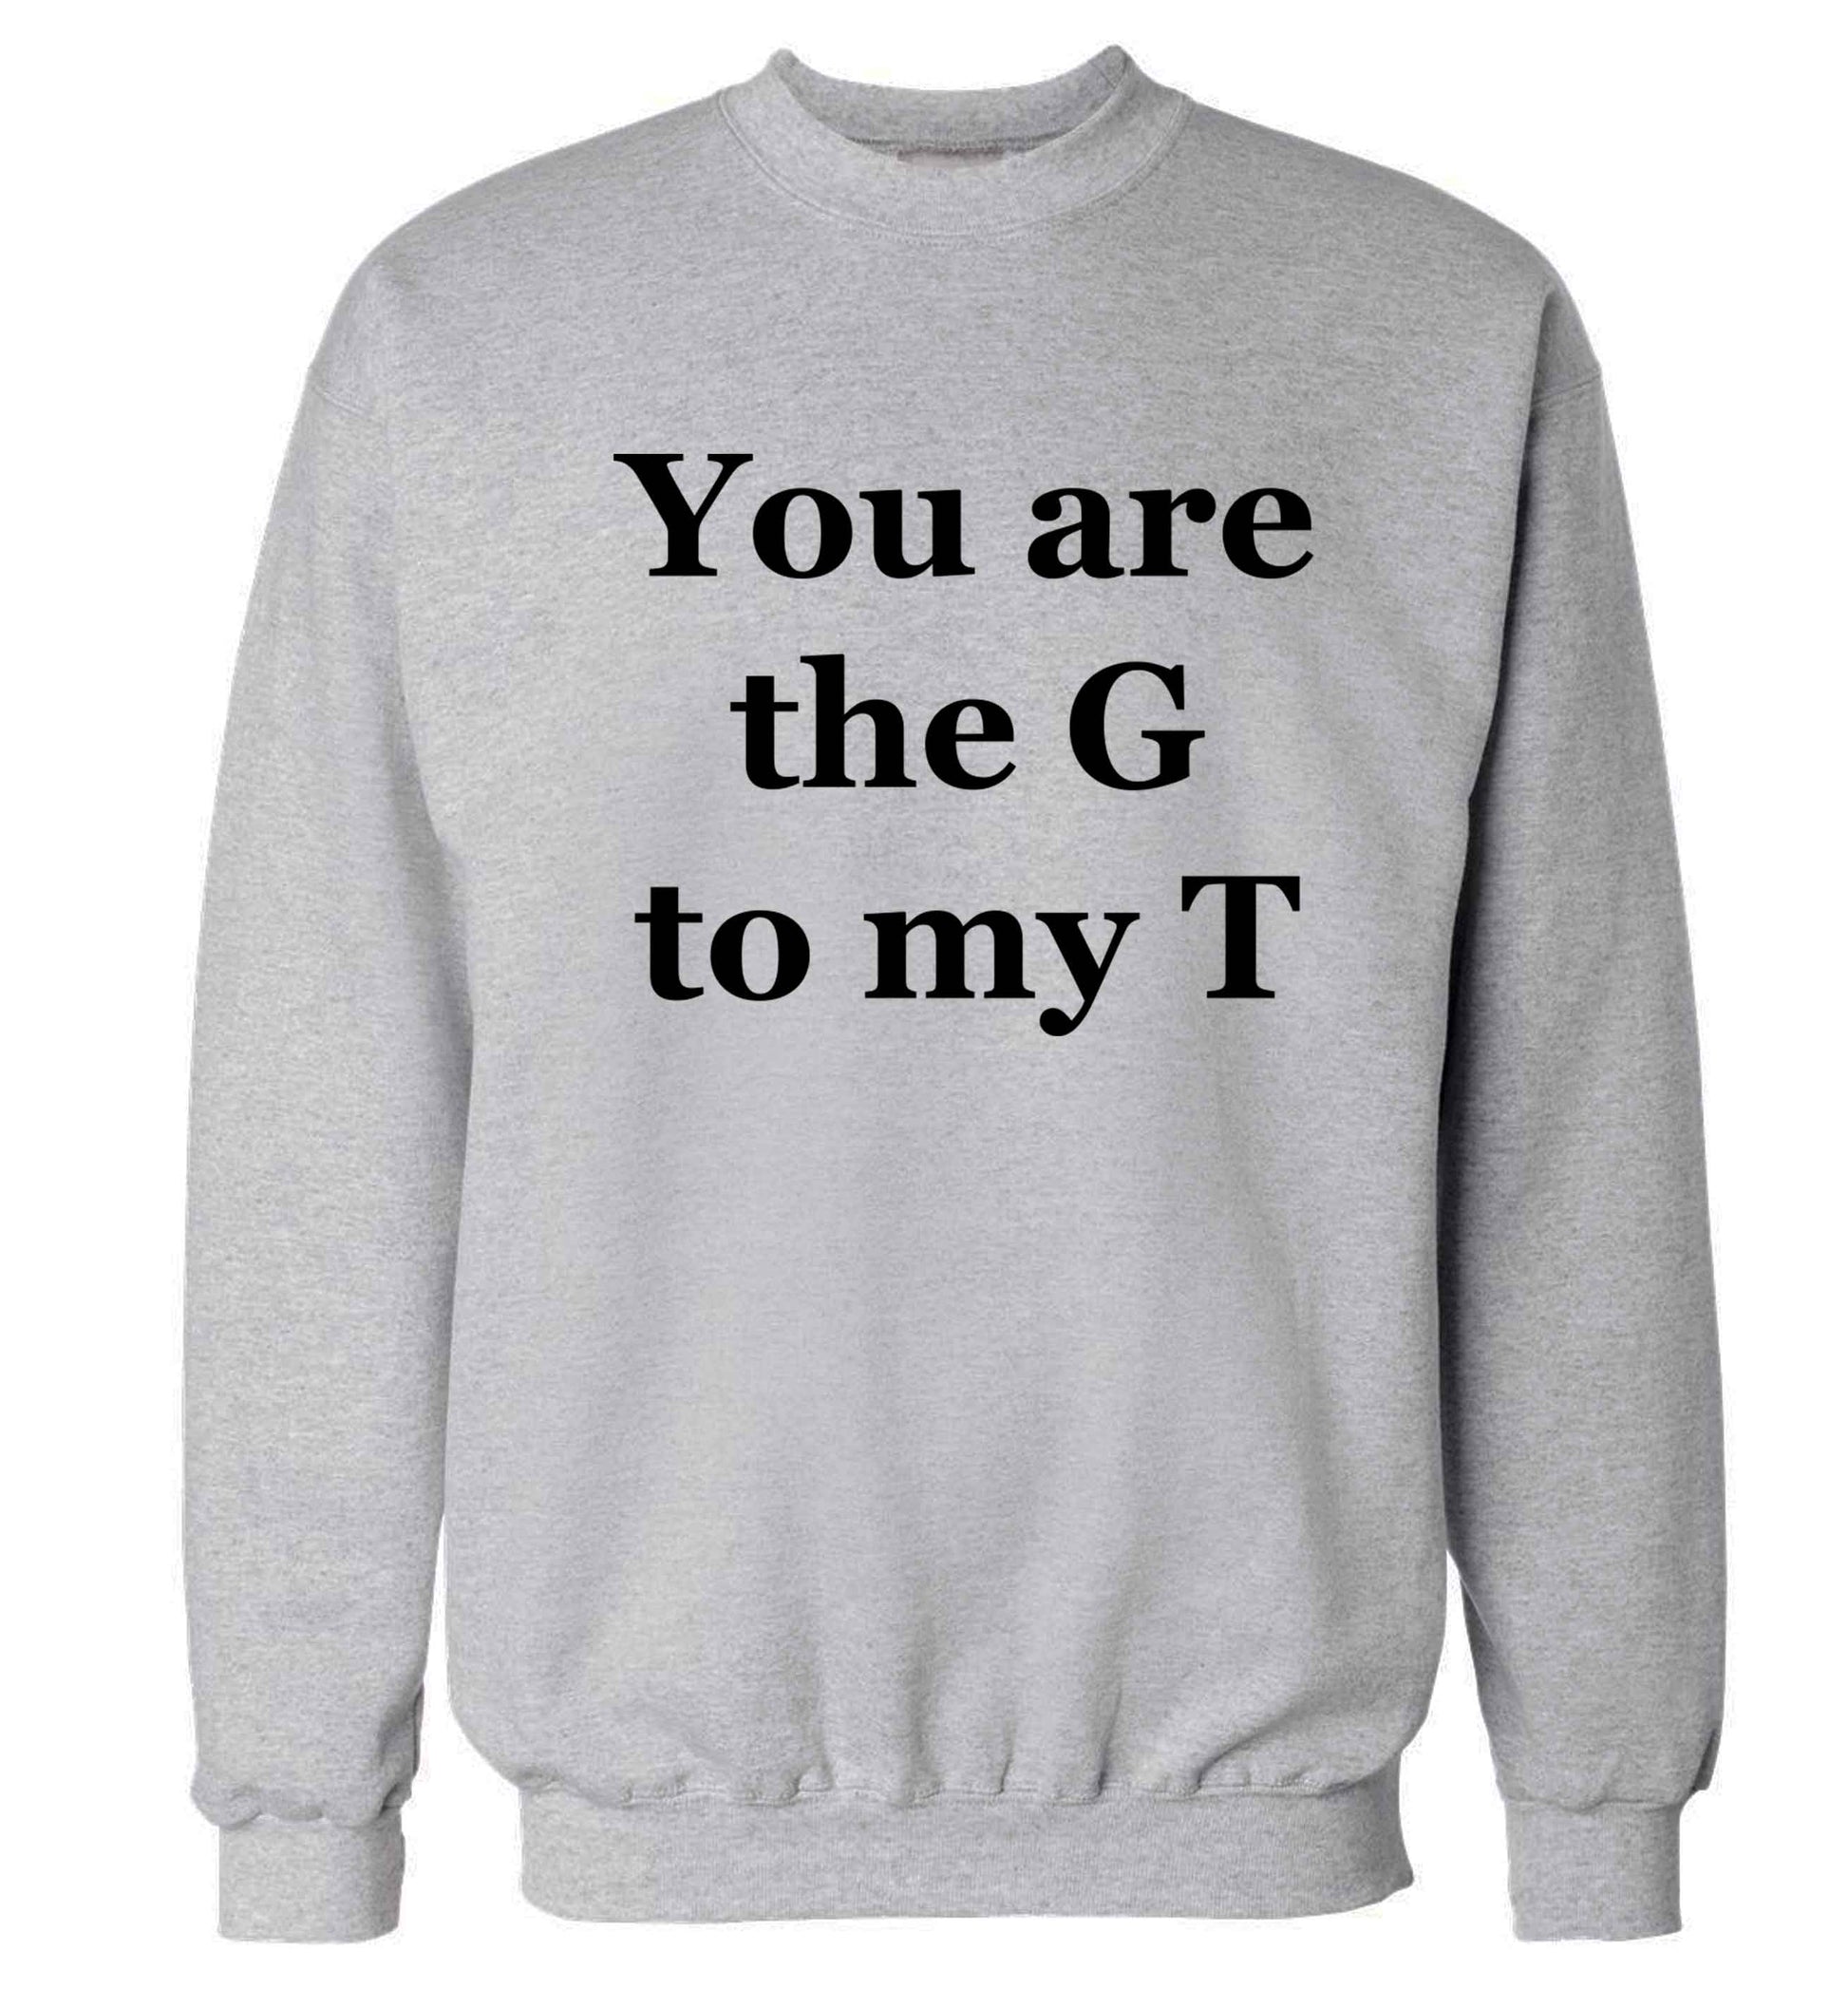 You are the G to my T Adult's unisex grey Sweater 2XL